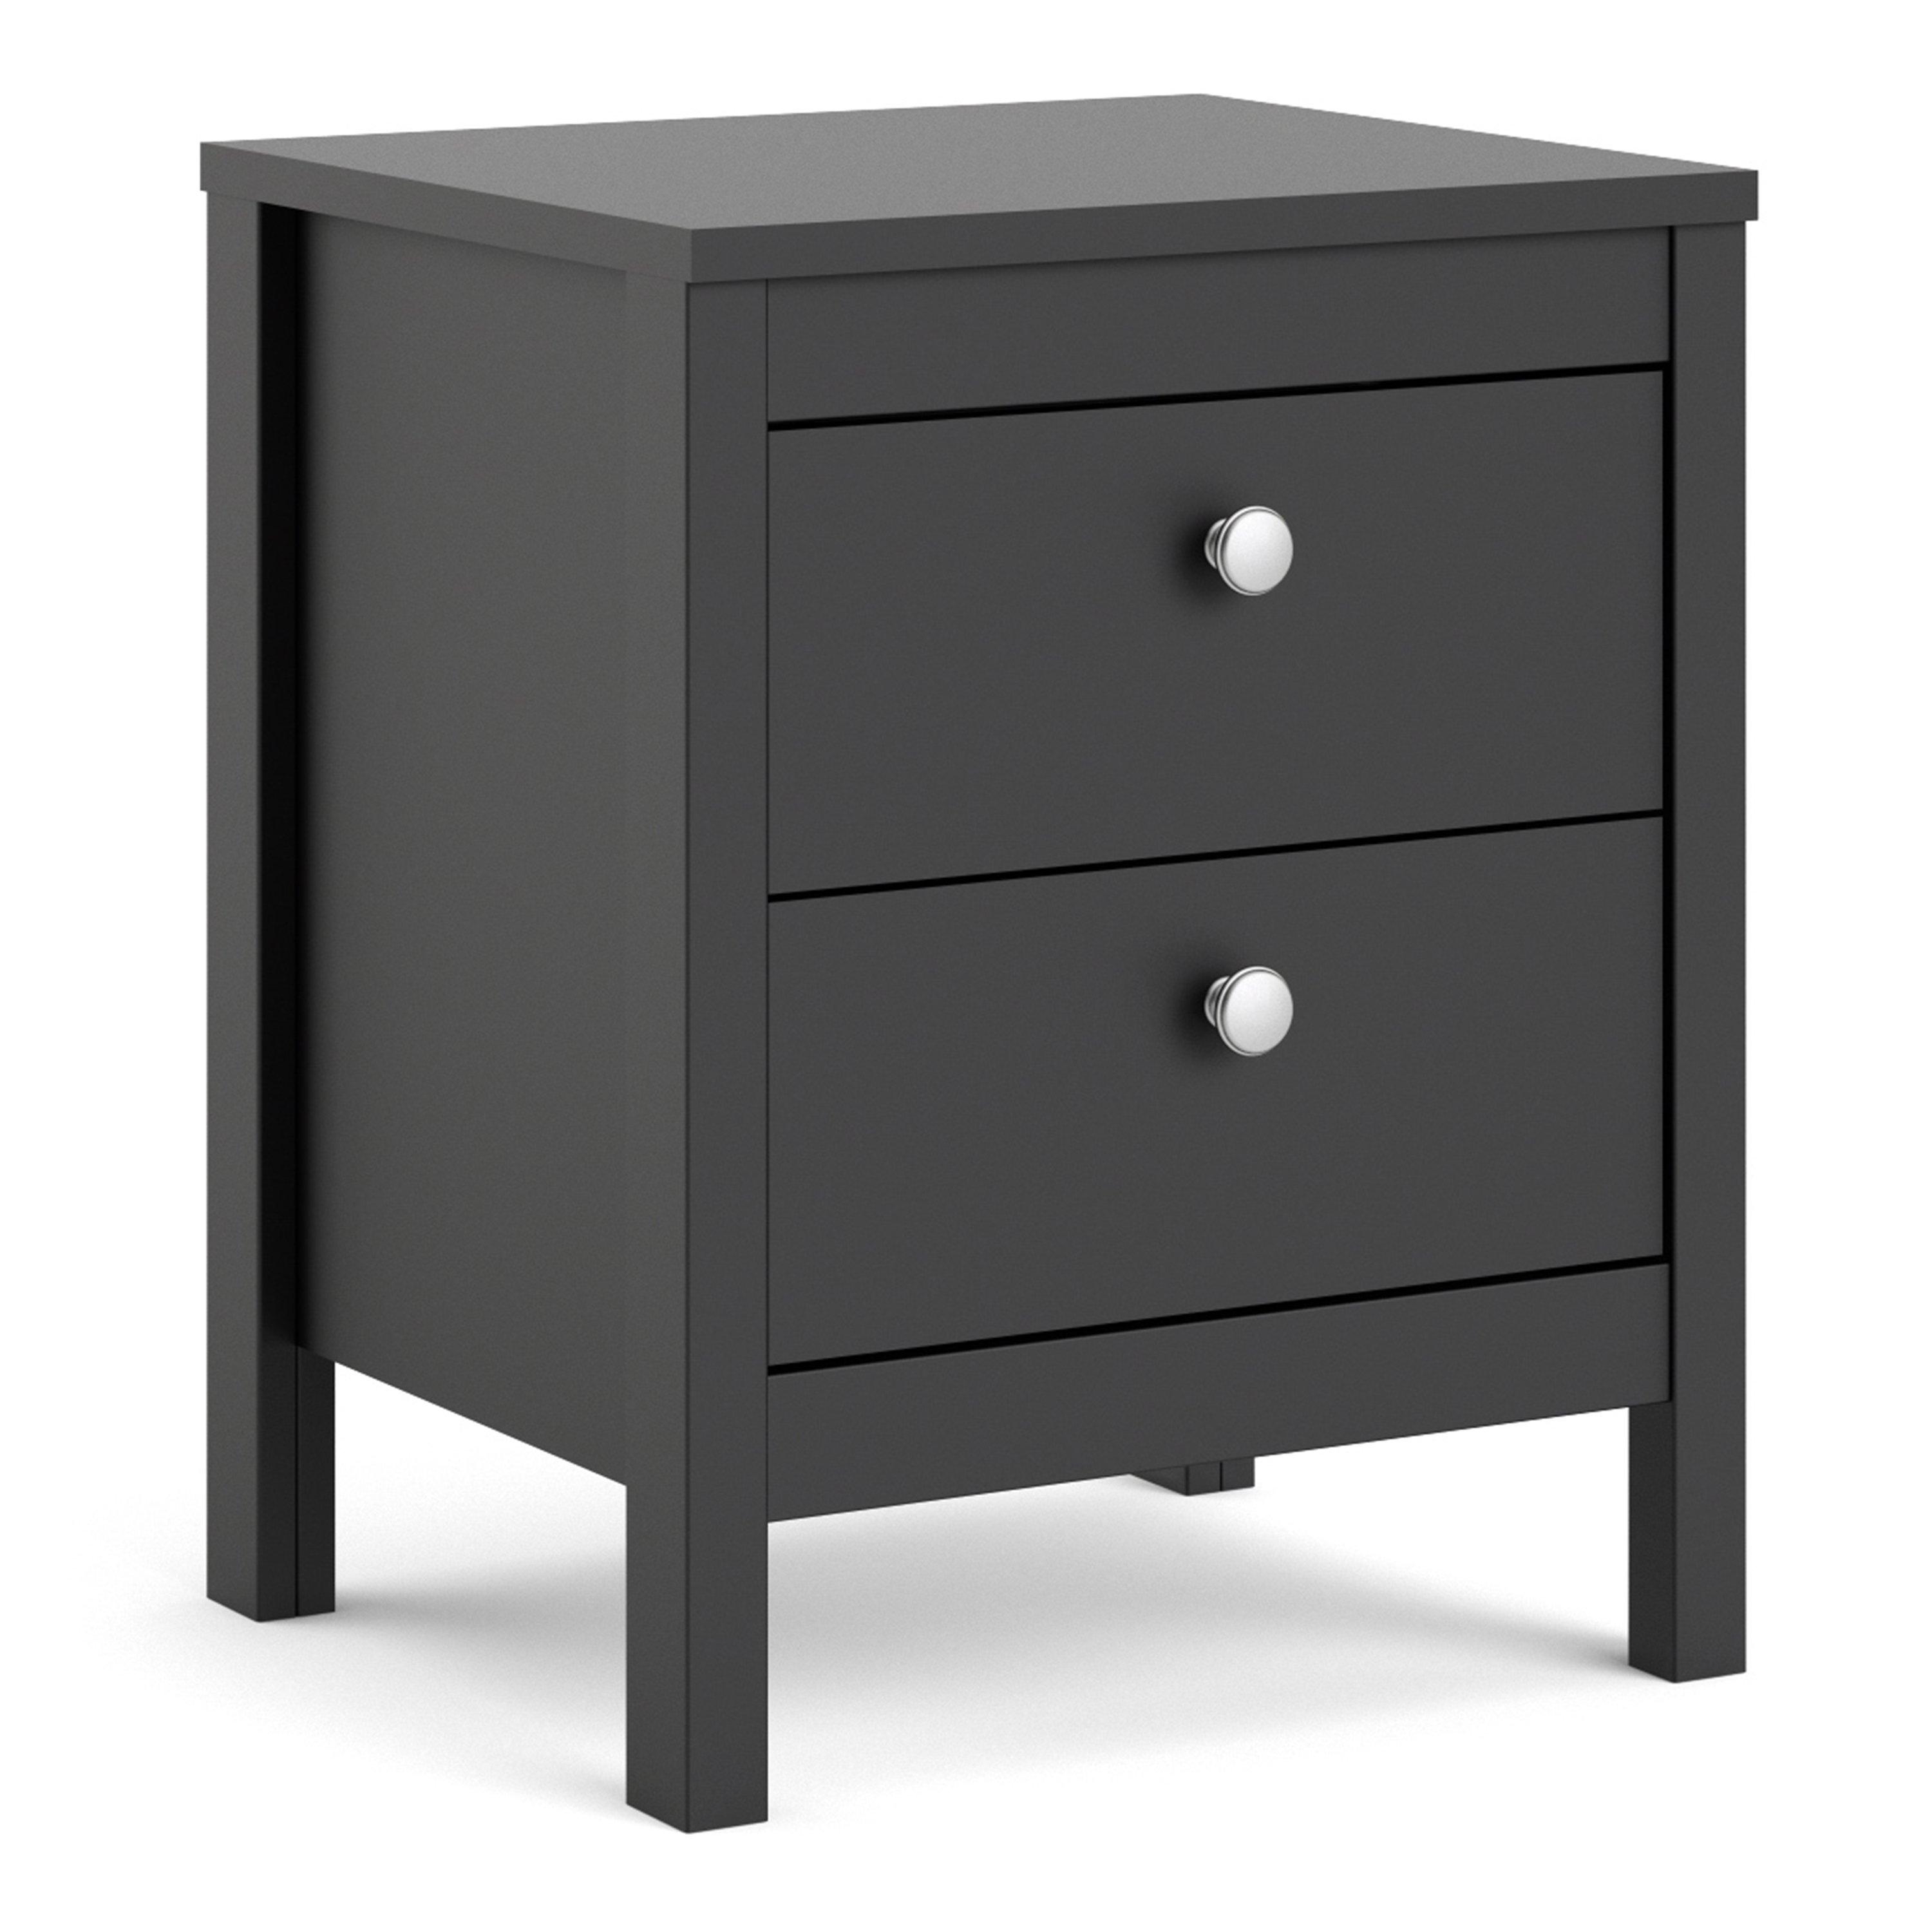 Madrid Bedside Table 2 Drawers